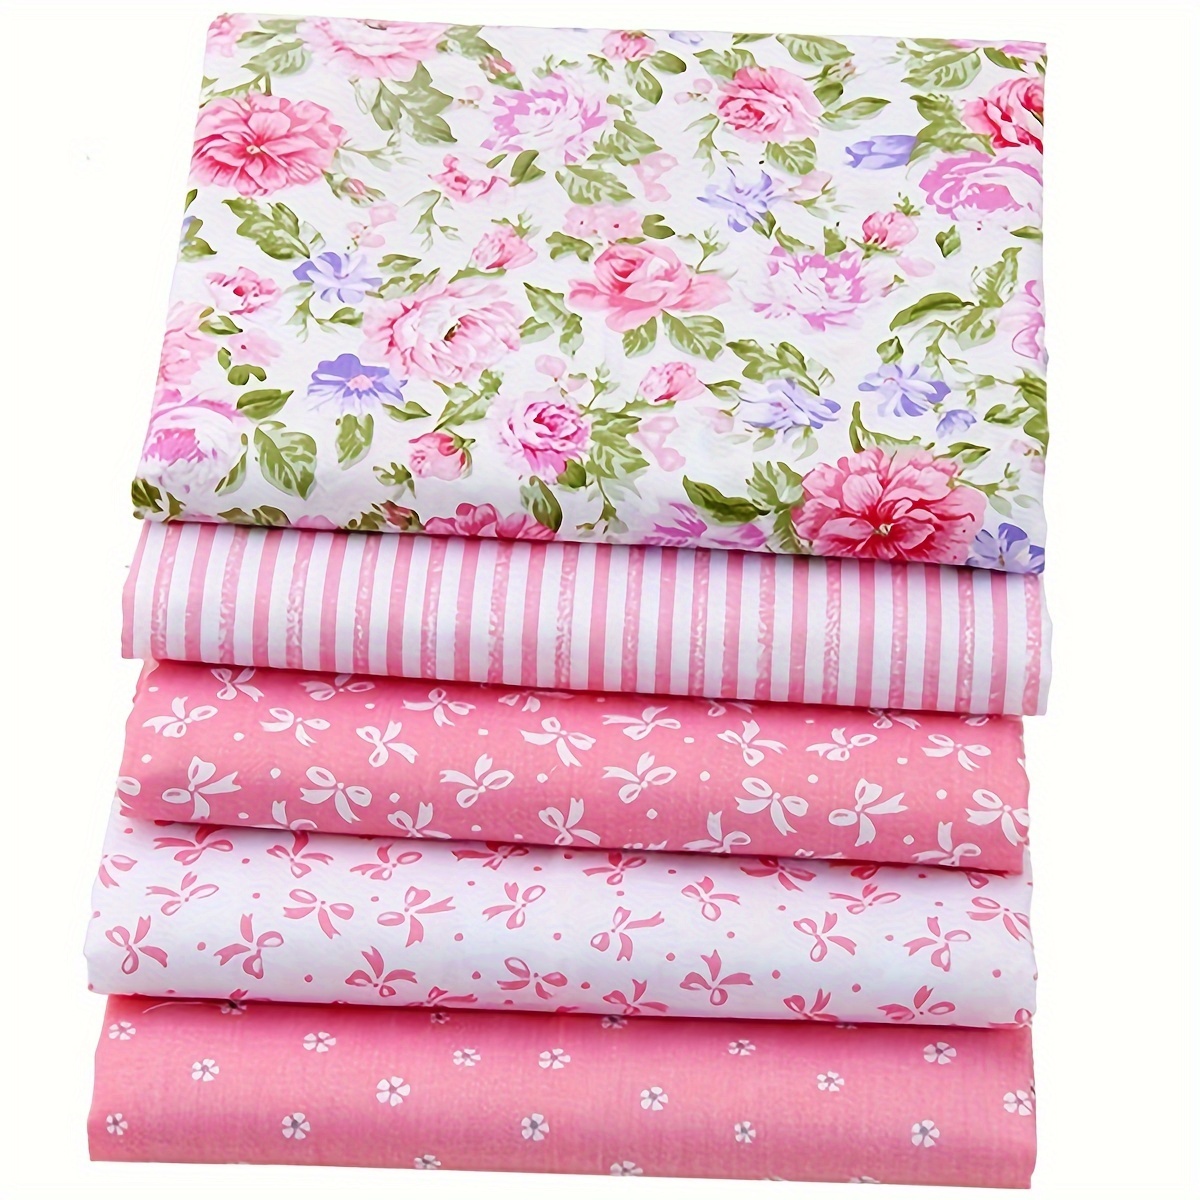 

100% Cotton Quilting Fabric Bundles - 5 Pack, Precut Pink Floral Prints, Hand Wash Only, 15.8" X 19.7" Sheets For Diy Crafts, Sewing & Patchwork